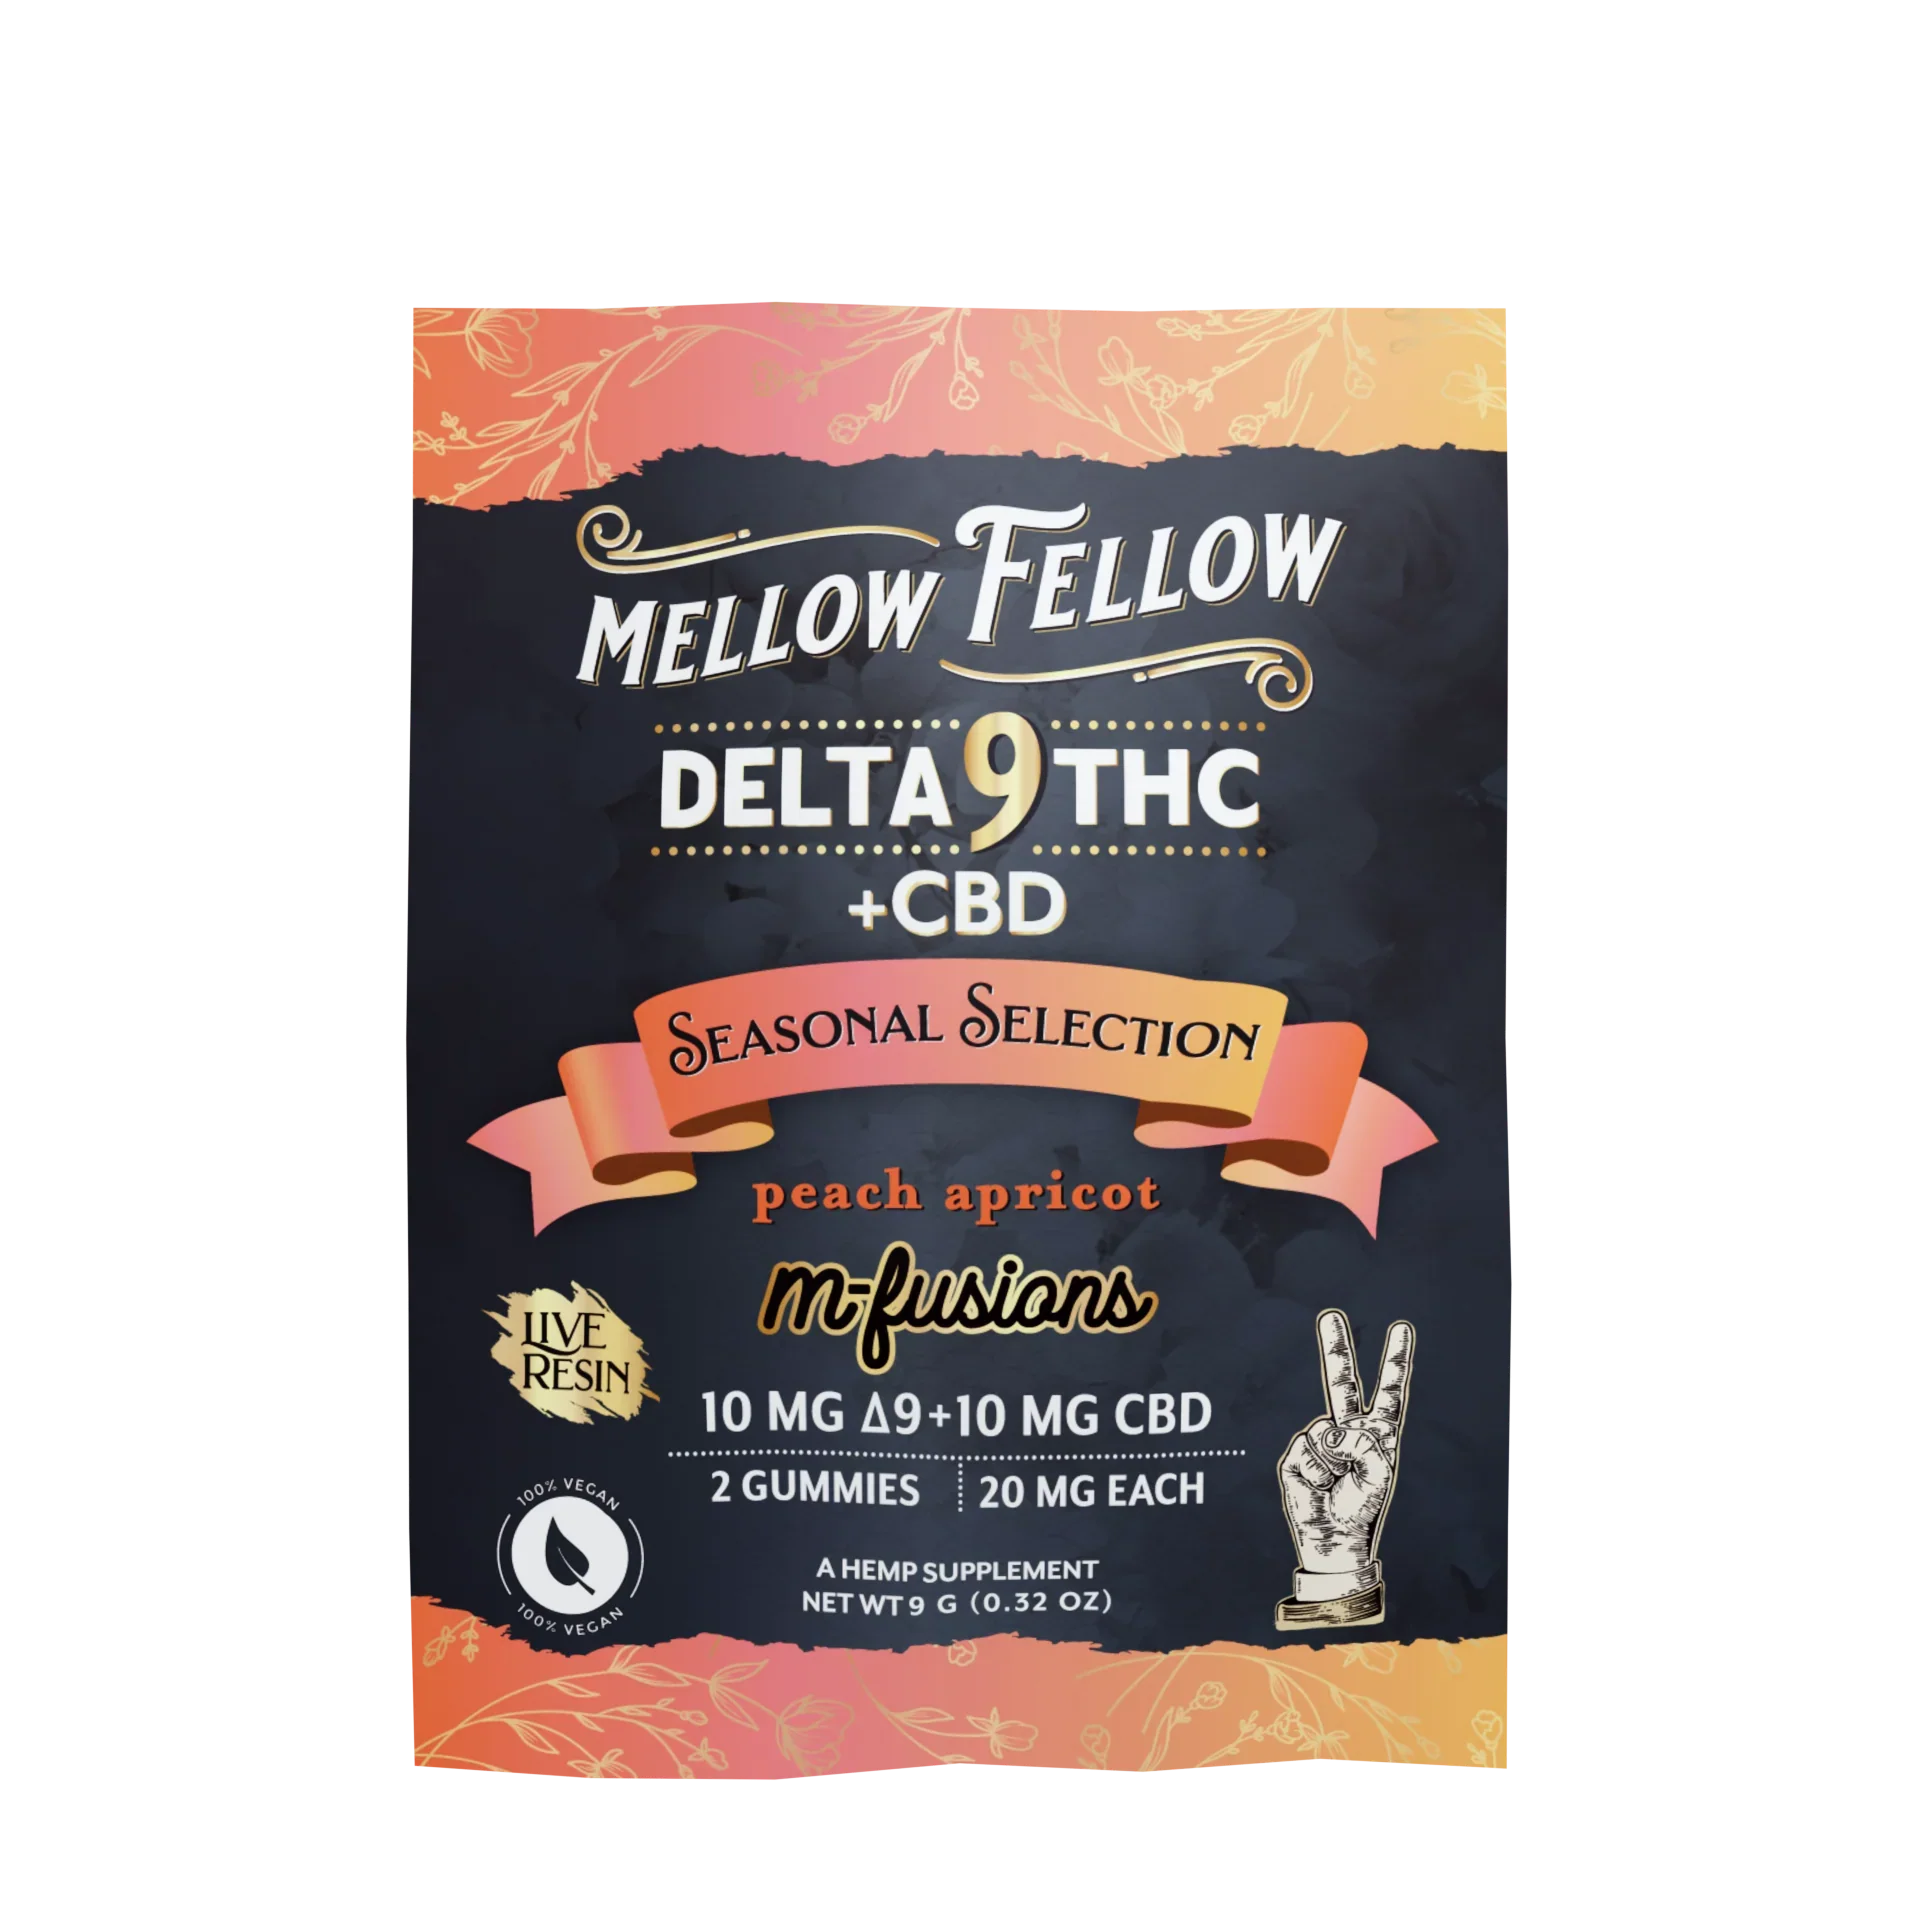 Mellow Fellow Live Resin Infused Edibles - 2cnt 40mg Delta 9 THC & CBD - Peach Apricot (Seasonal Selection) Best Price